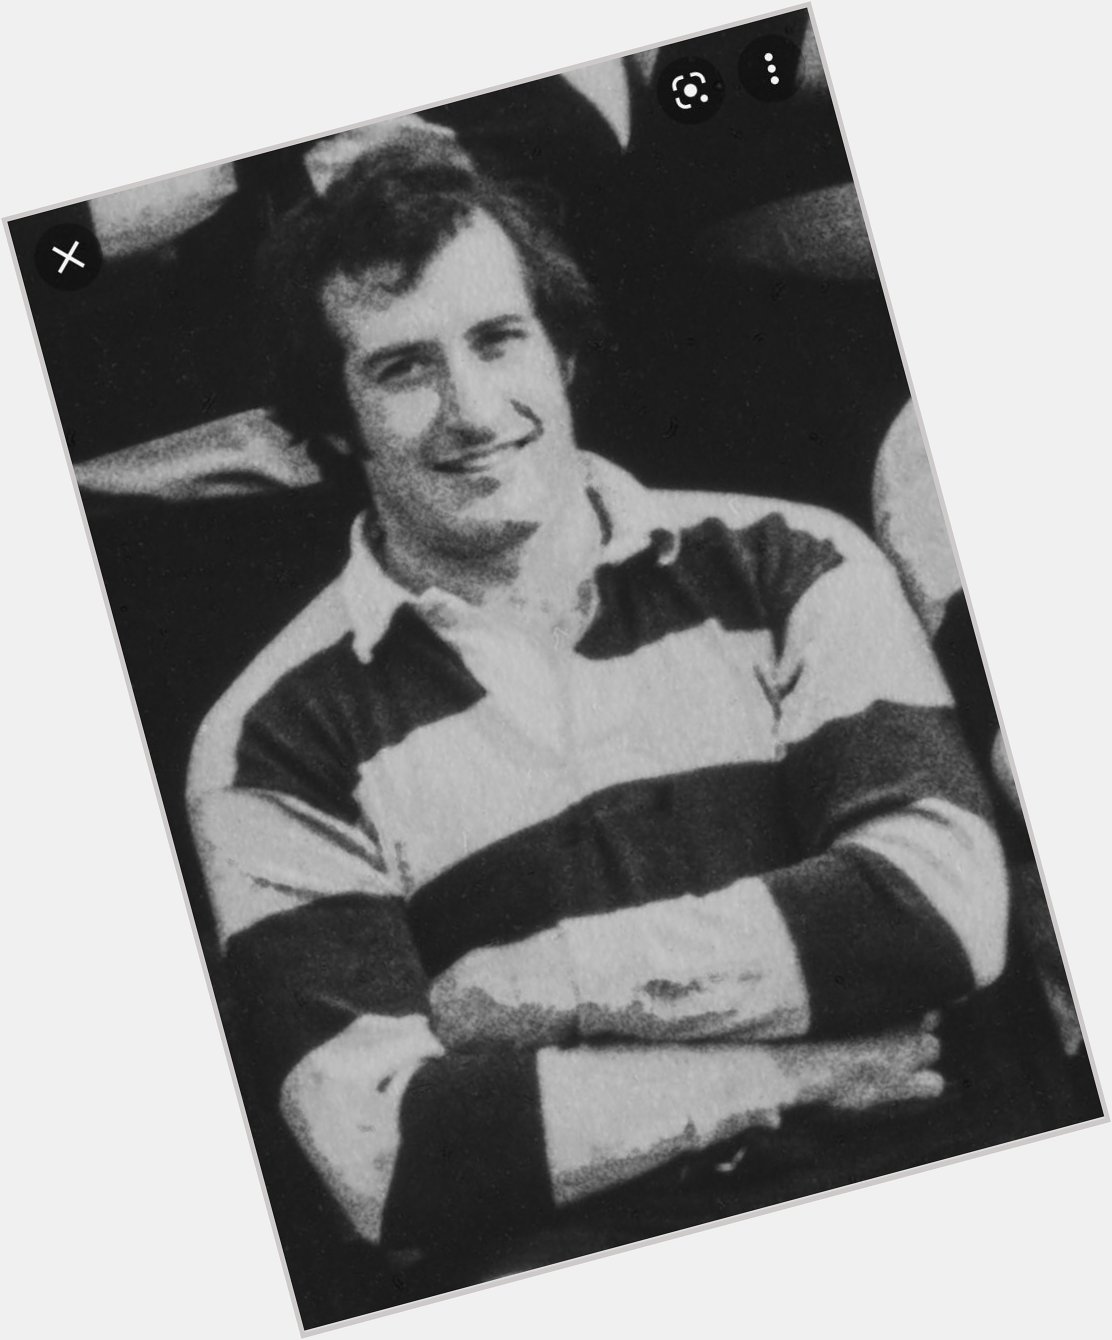 Happy Birthday / Penblwydd Hapus to the only and only Sir Gareth Edwards on his 75th birthday. Have a great day! 